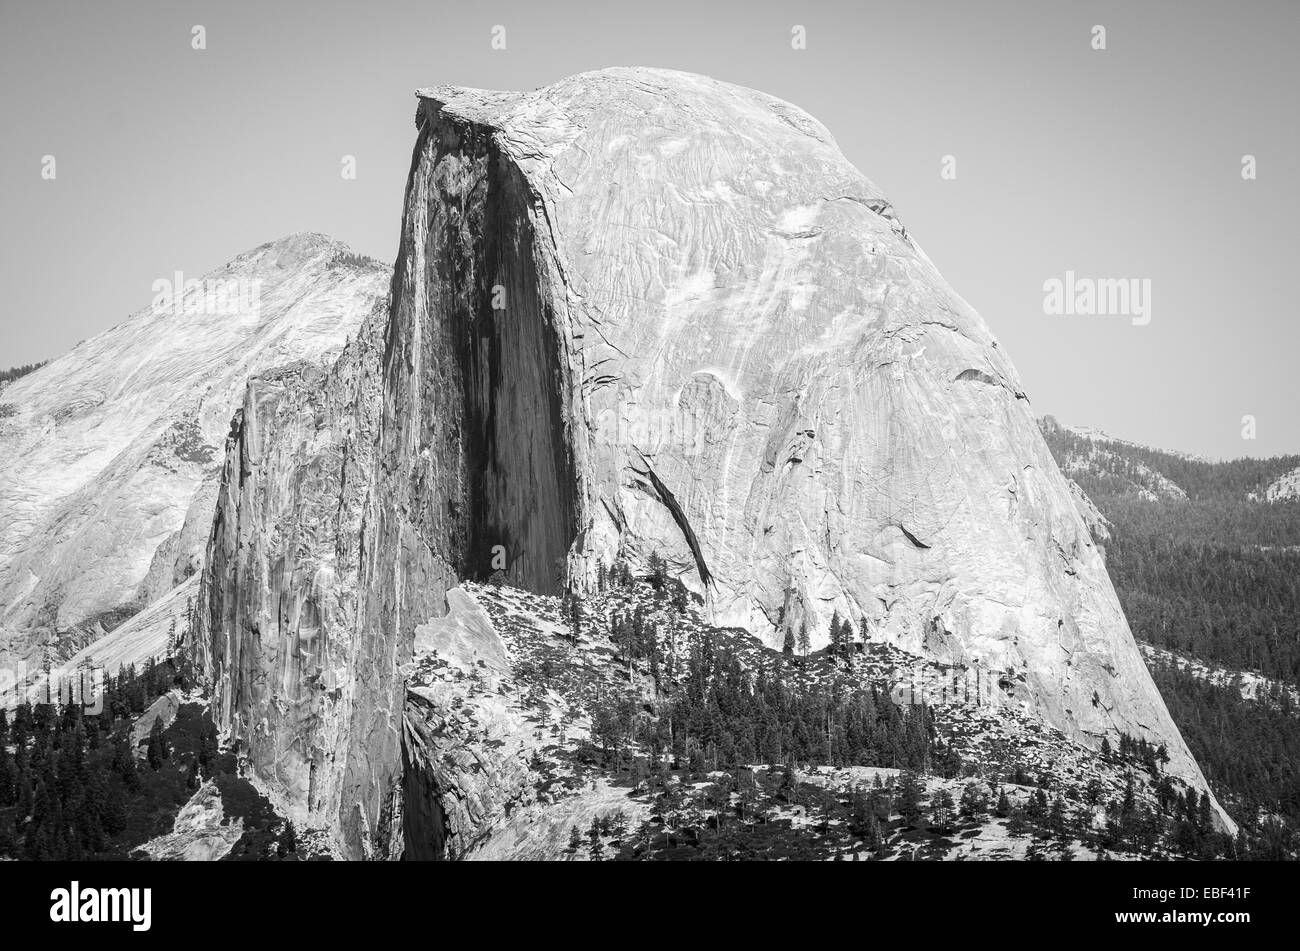 The iconic Half Dome as seen from Glacier Point in Yosemite National Park Stock Photo